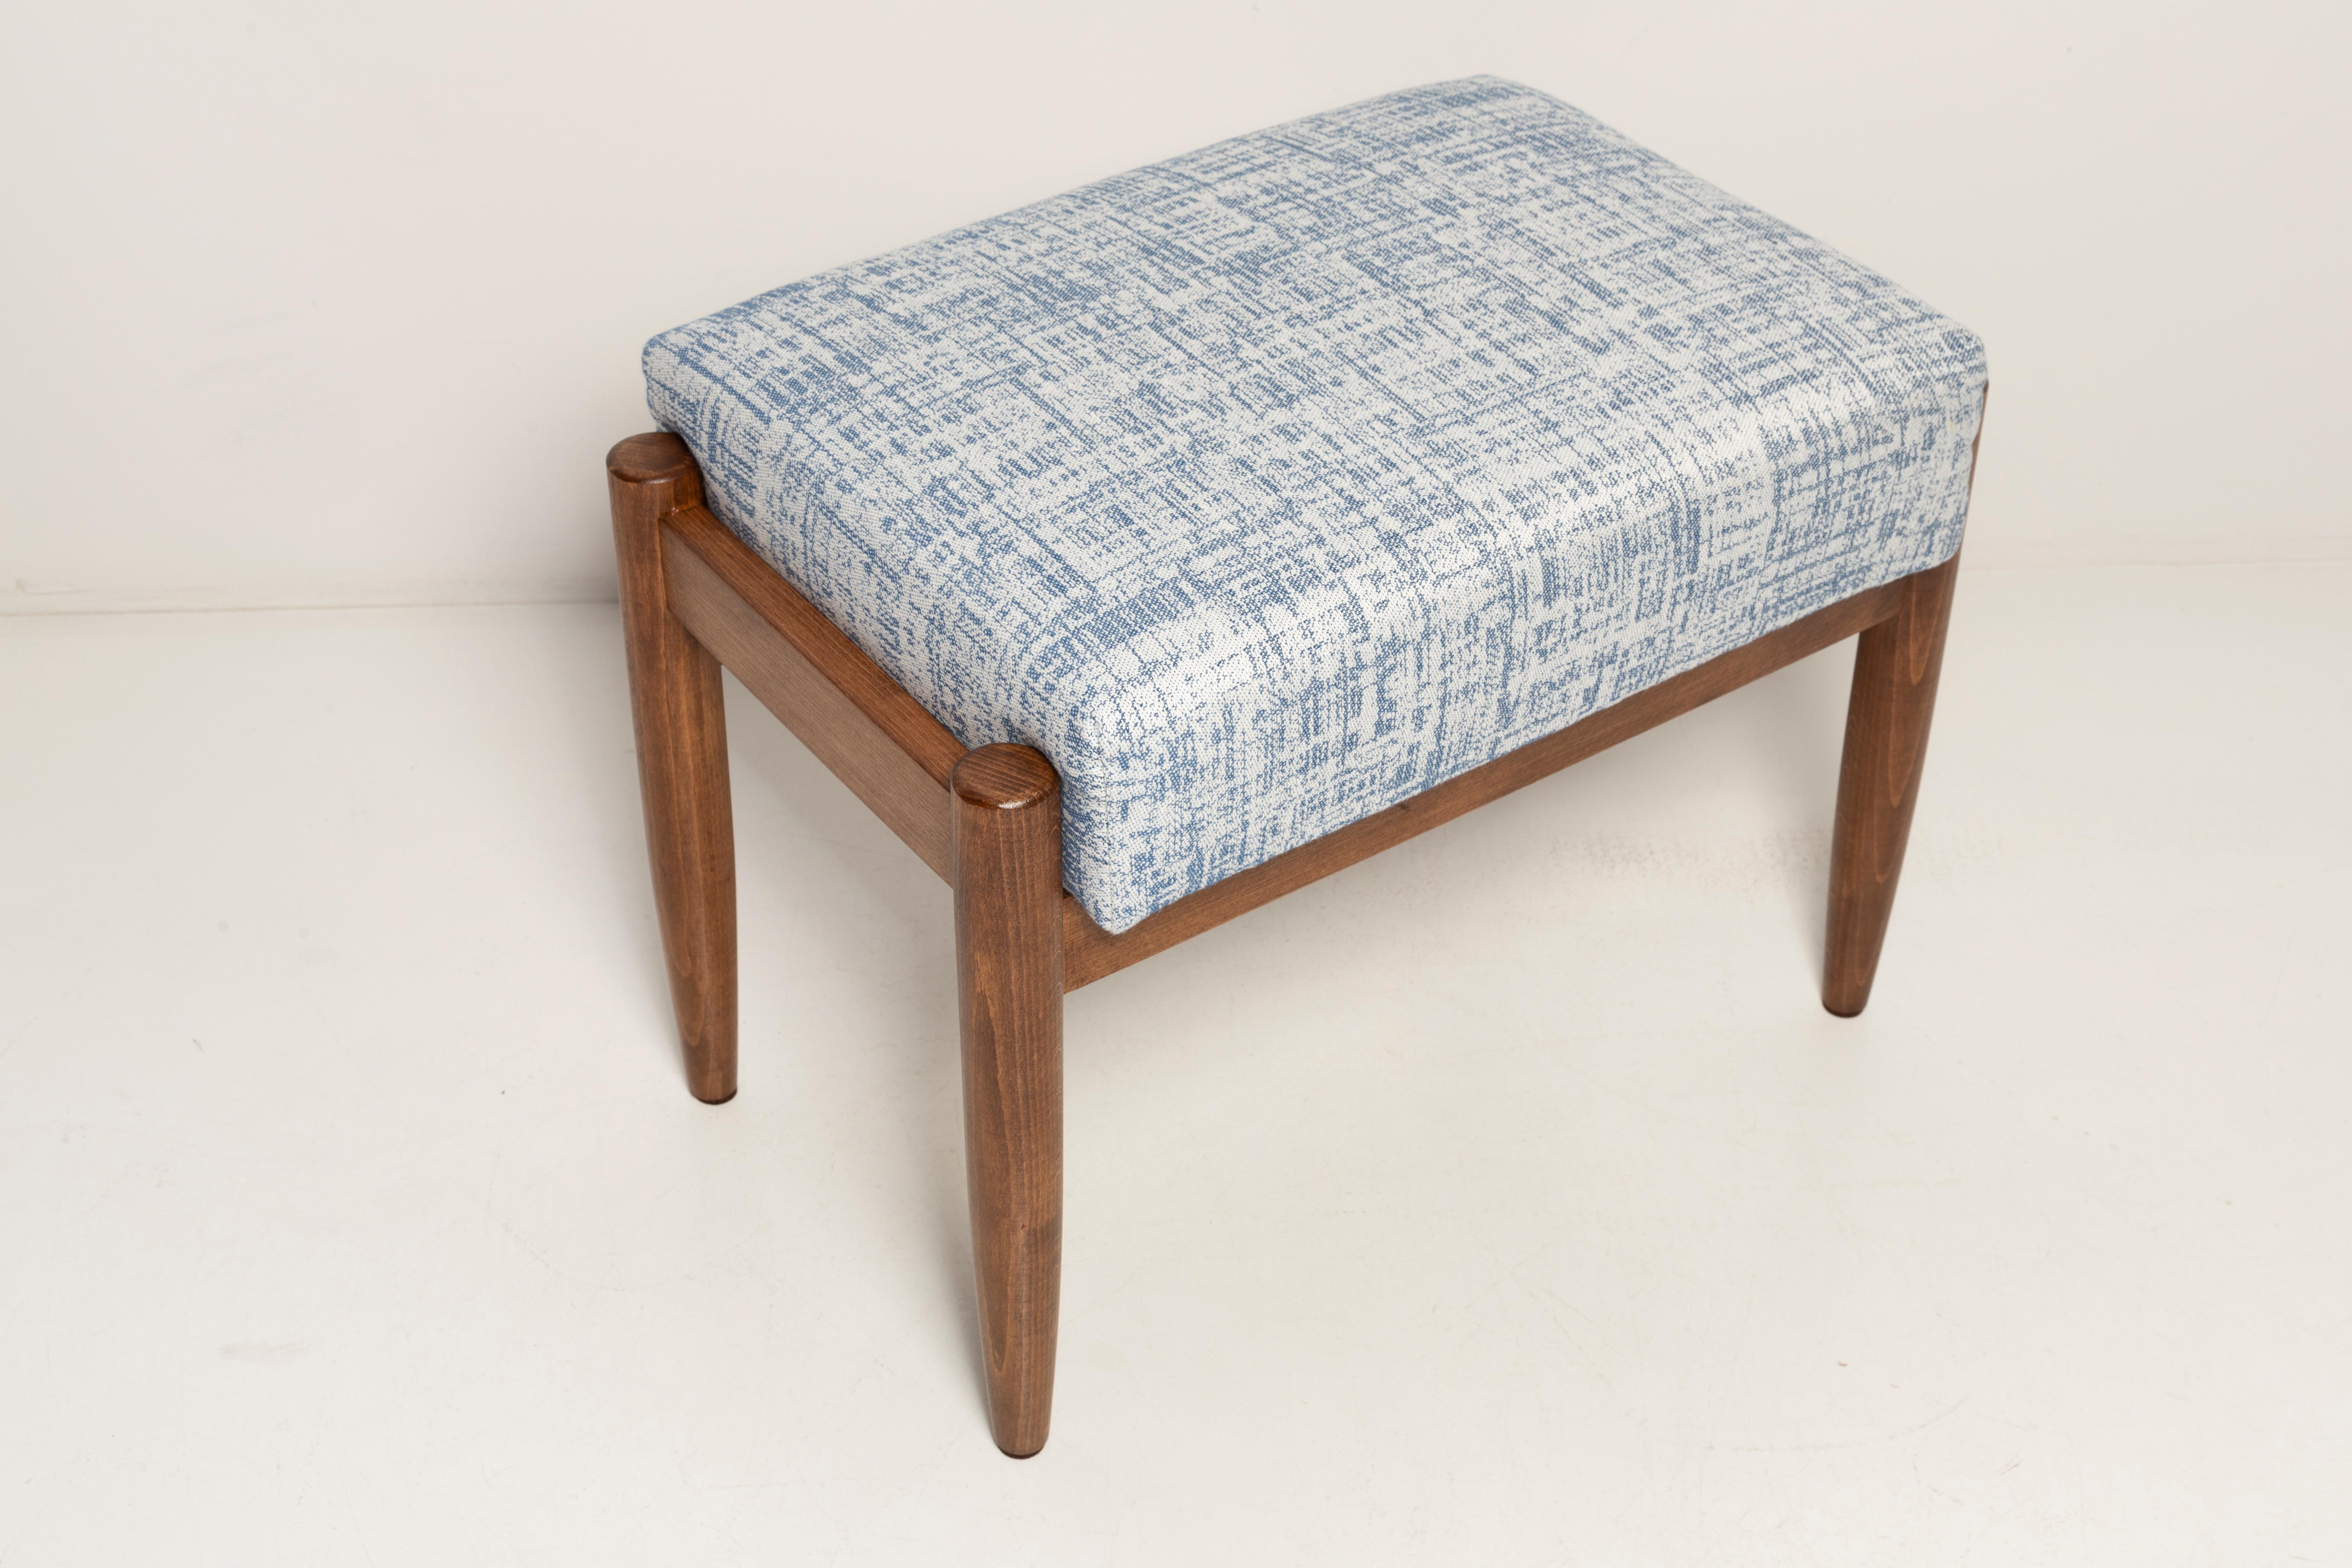 20th Century Midcentury Vintage White and Blue Linen Stool, Edmund Homa, Europe, 1960s For Sale